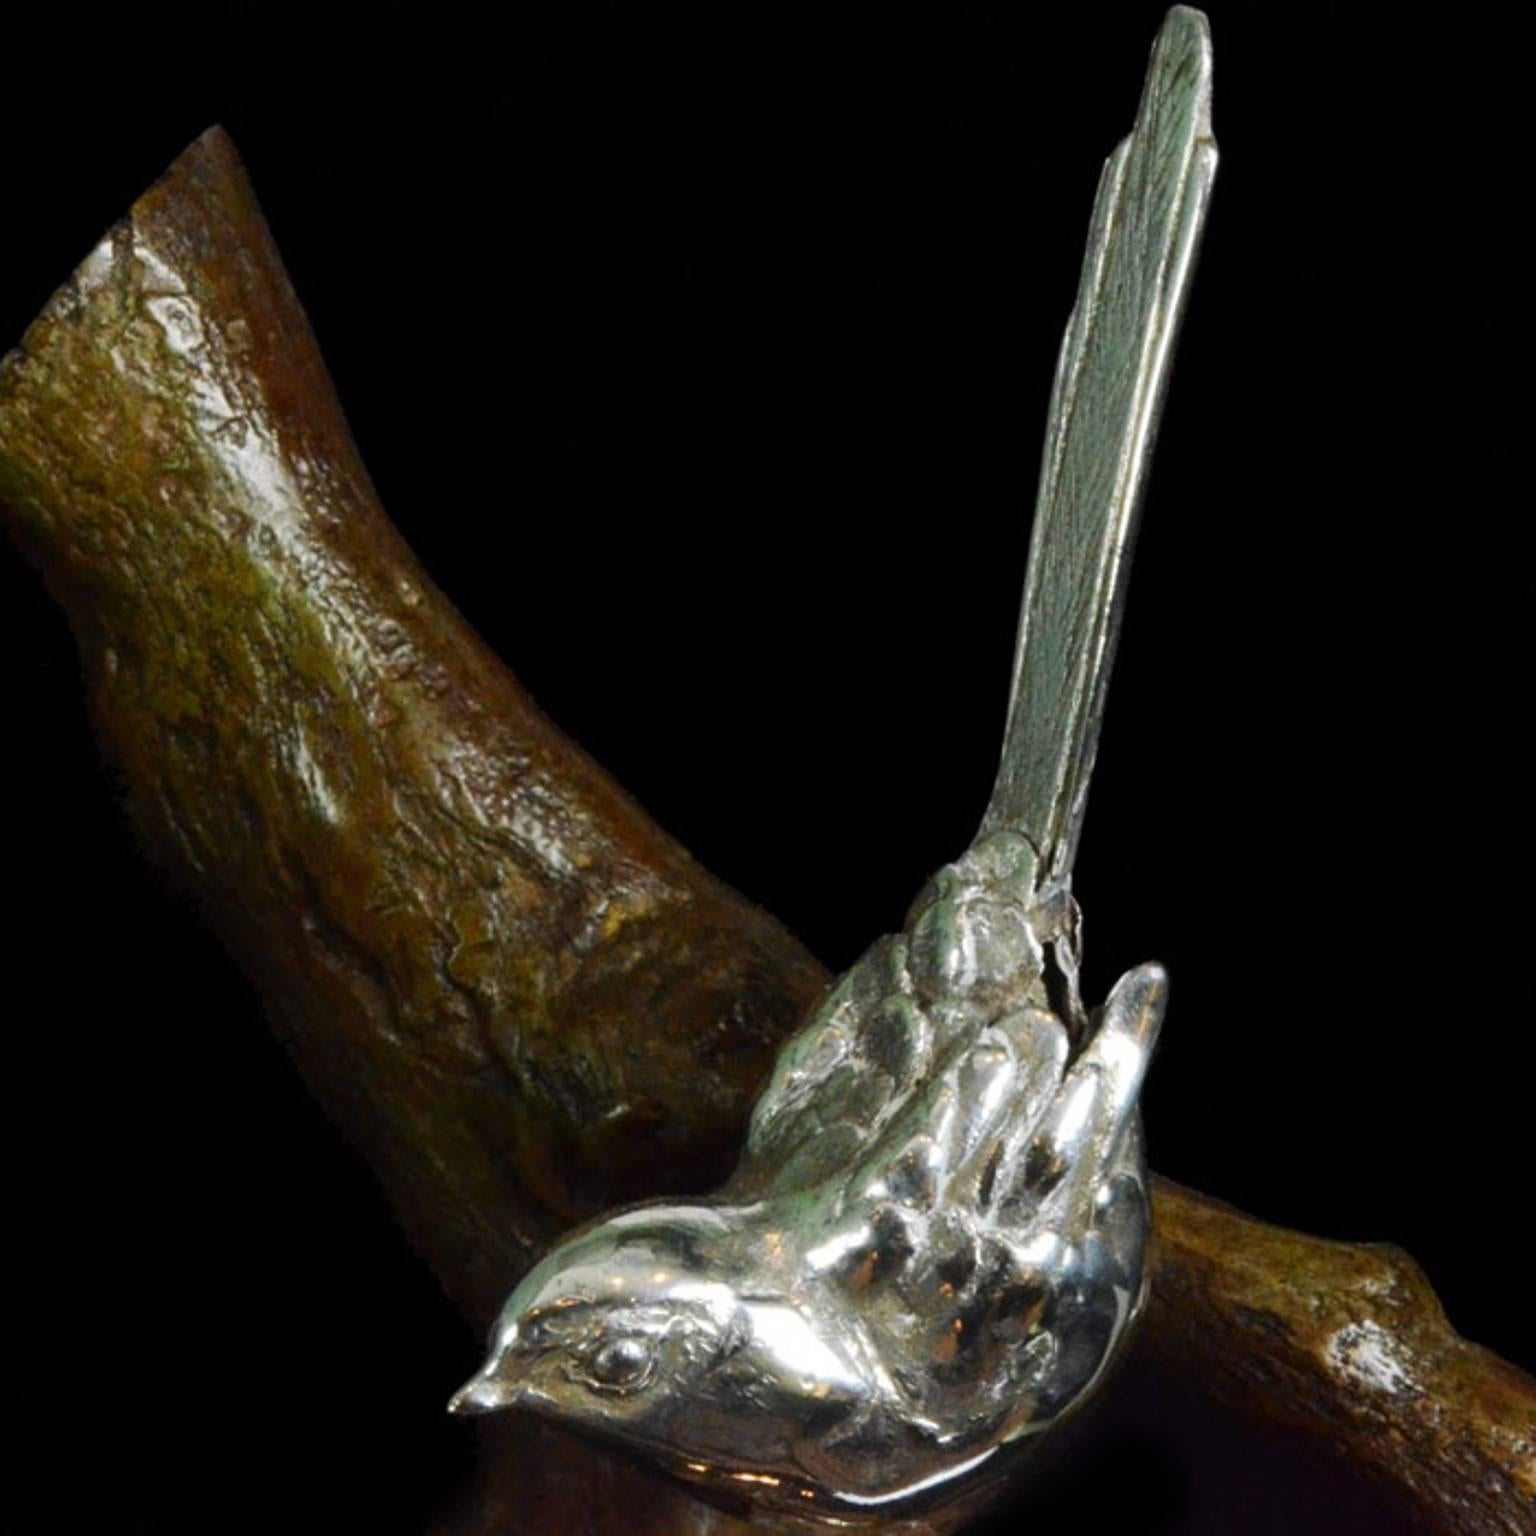 A pair of silver long-tailed tits on a bronze branch  - Sculpture by Ian Bowles